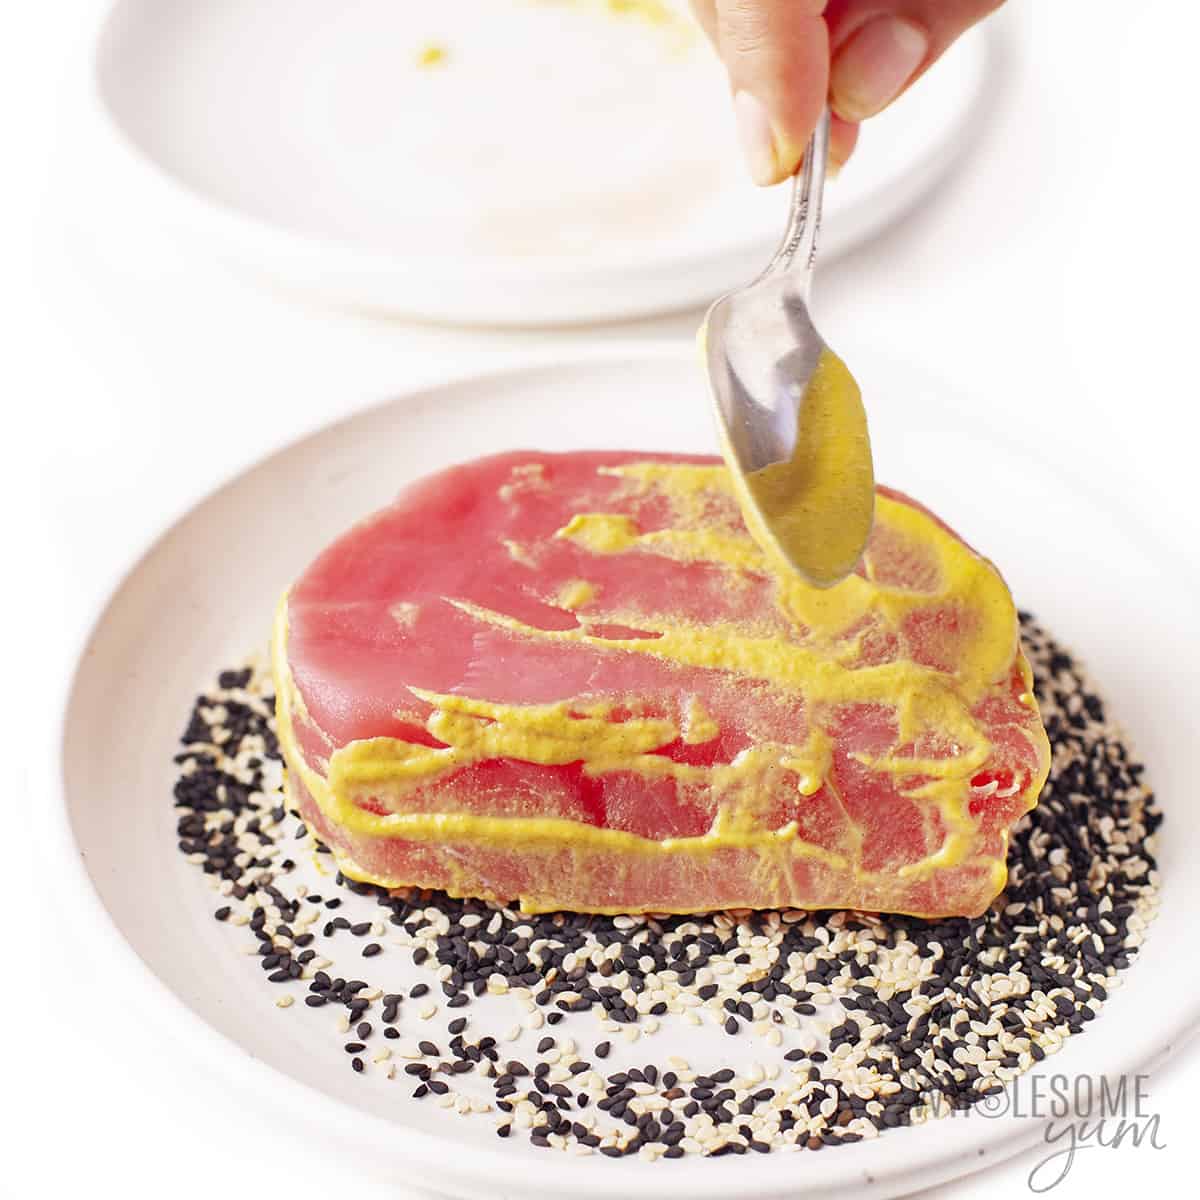 Tuna steak in pile of mixed sesame seeds with more mustard spread on uncovered side.